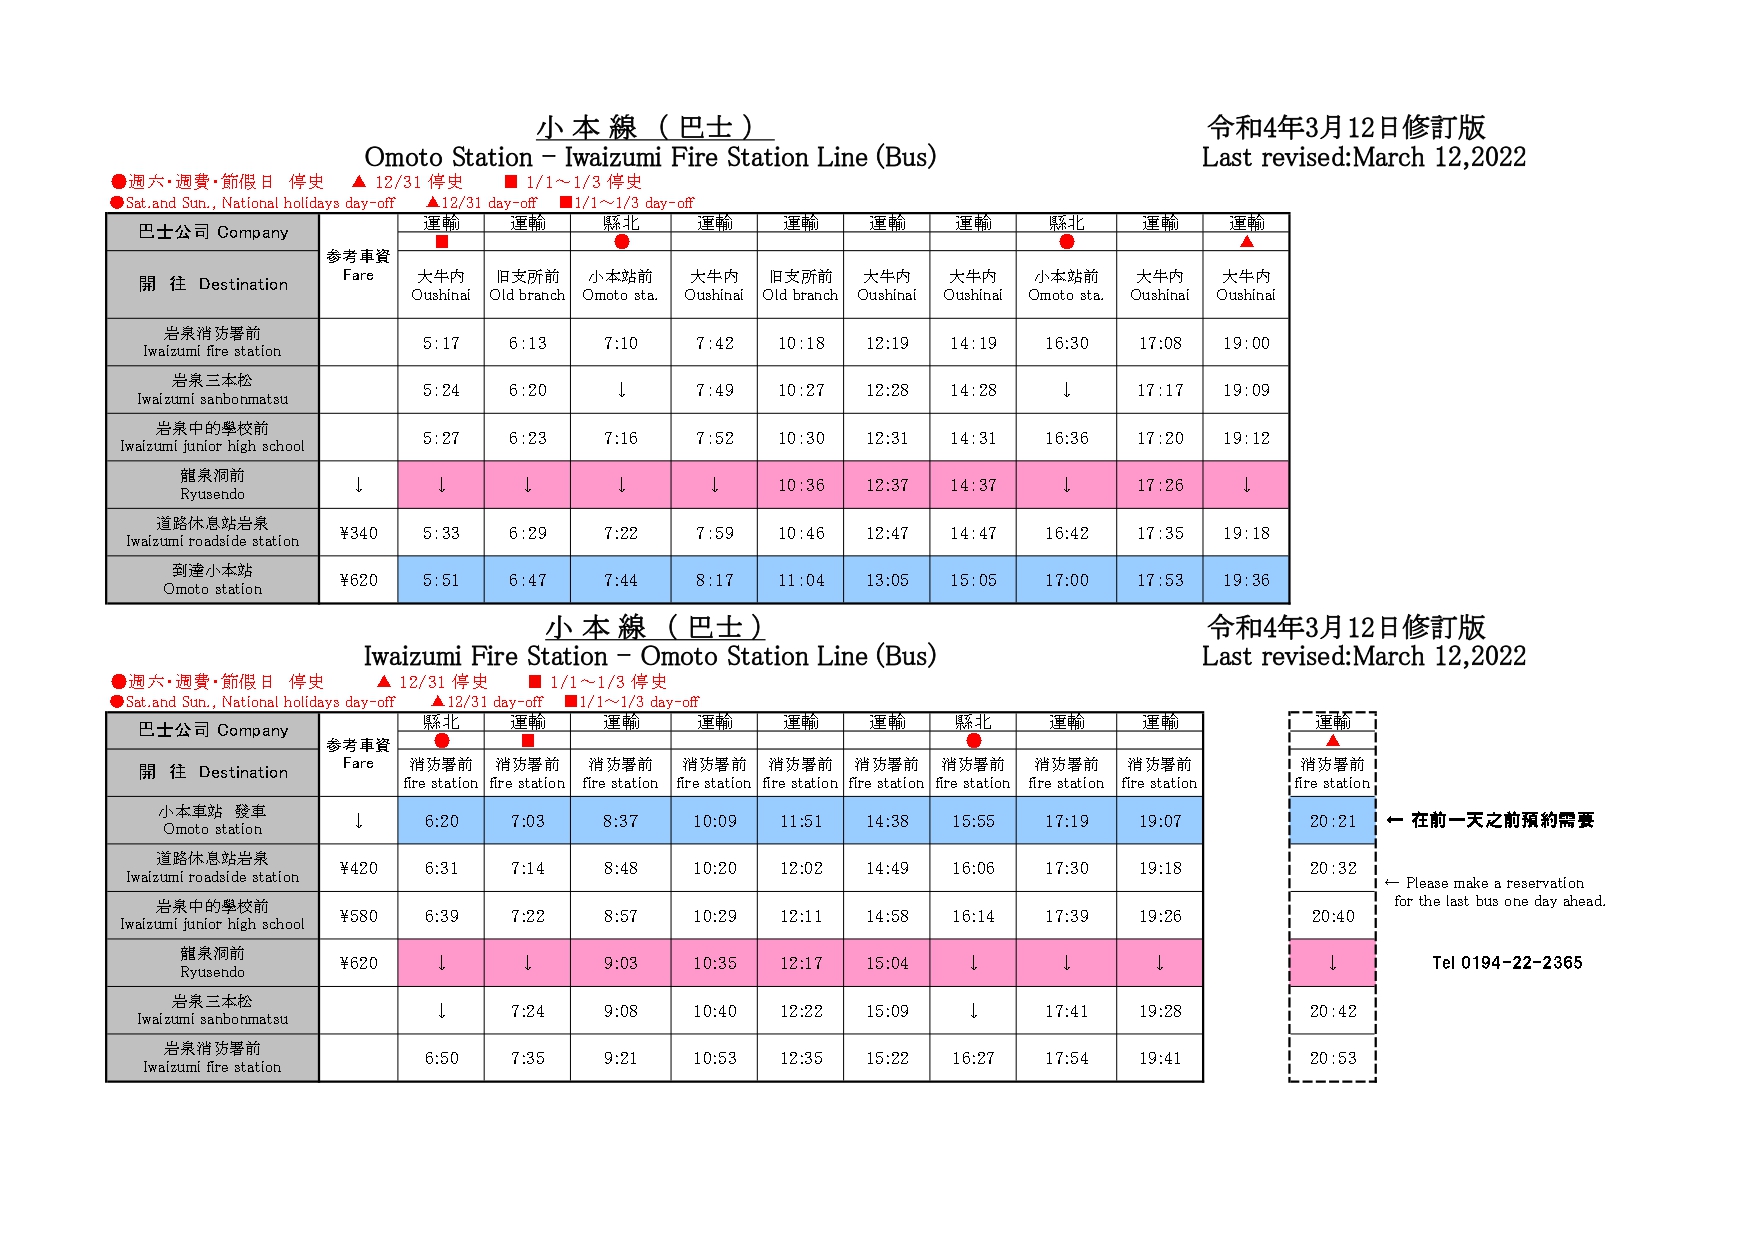 Timetable(Last revised:March 12, 2022)